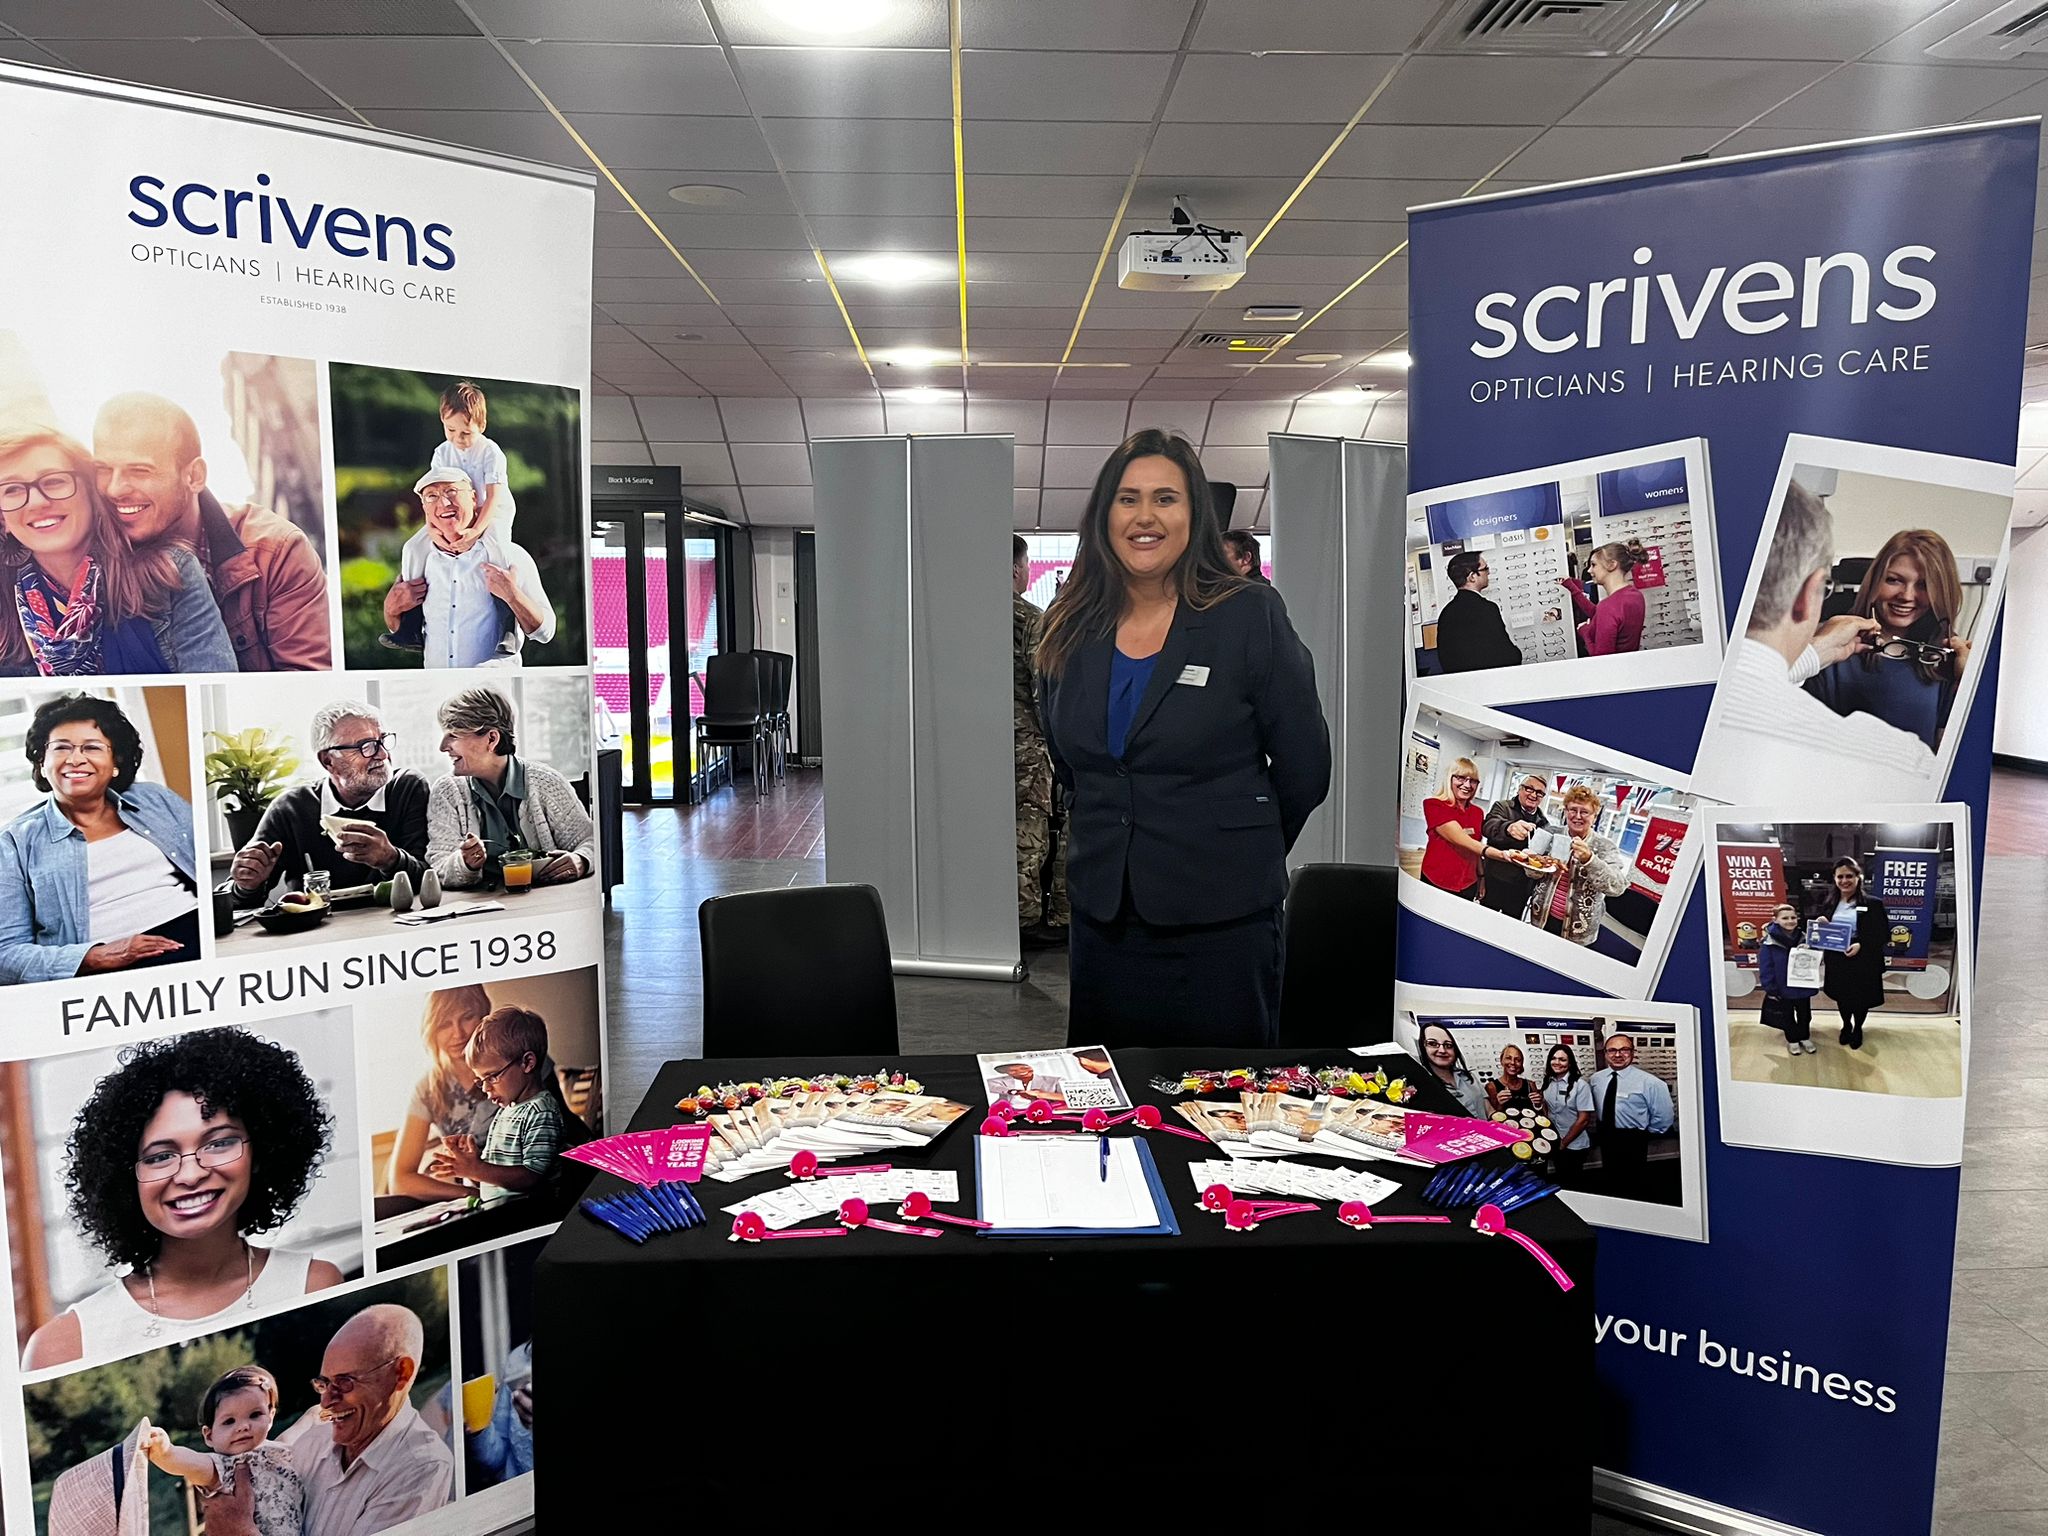 Scrivens at our event in Stoke-on-Trent